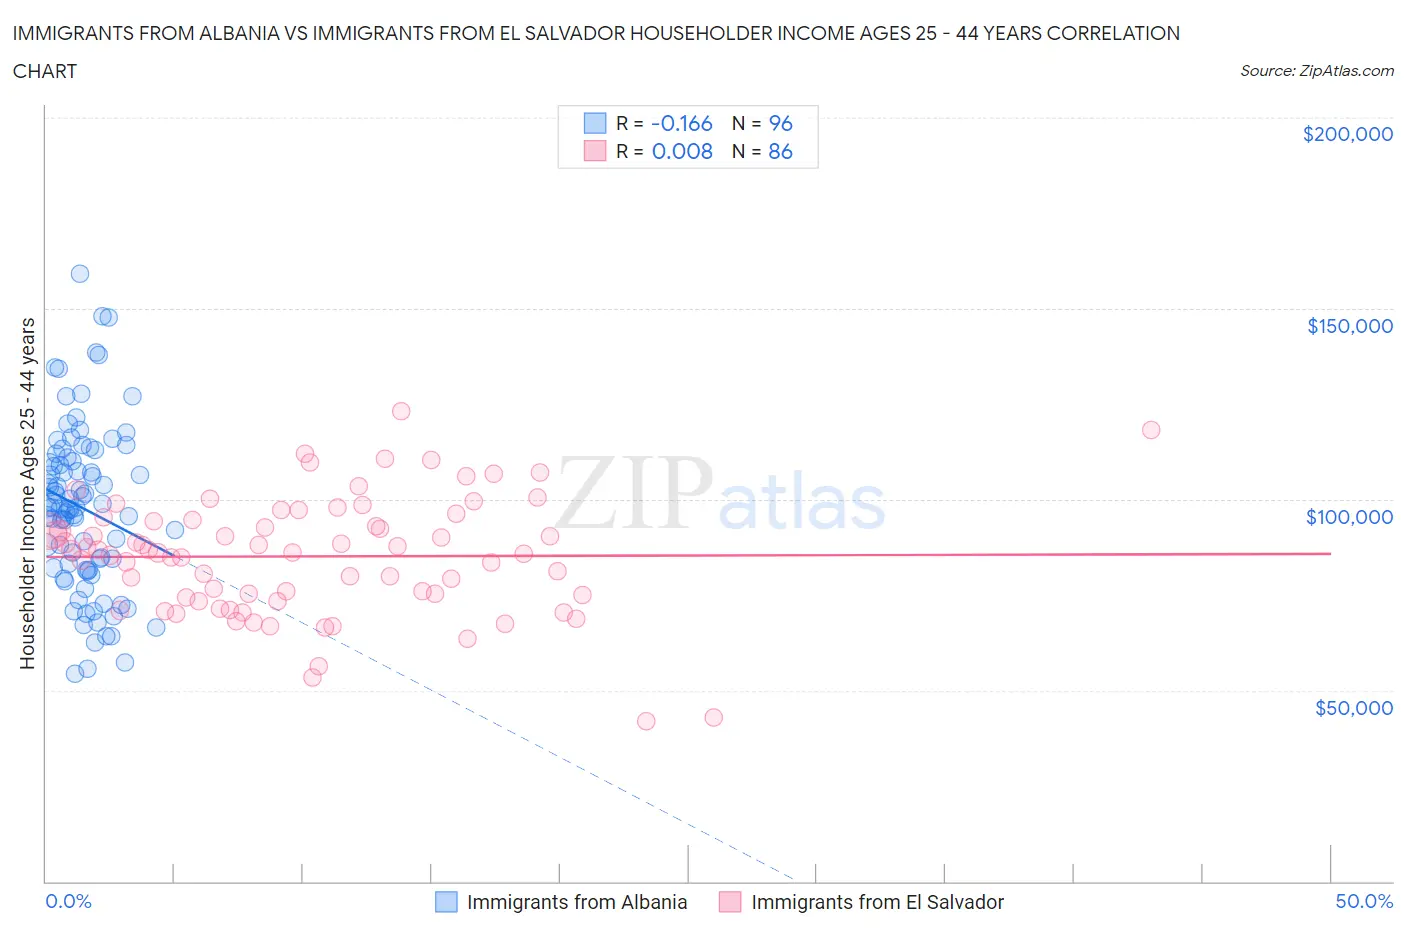 Immigrants from Albania vs Immigrants from El Salvador Householder Income Ages 25 - 44 years